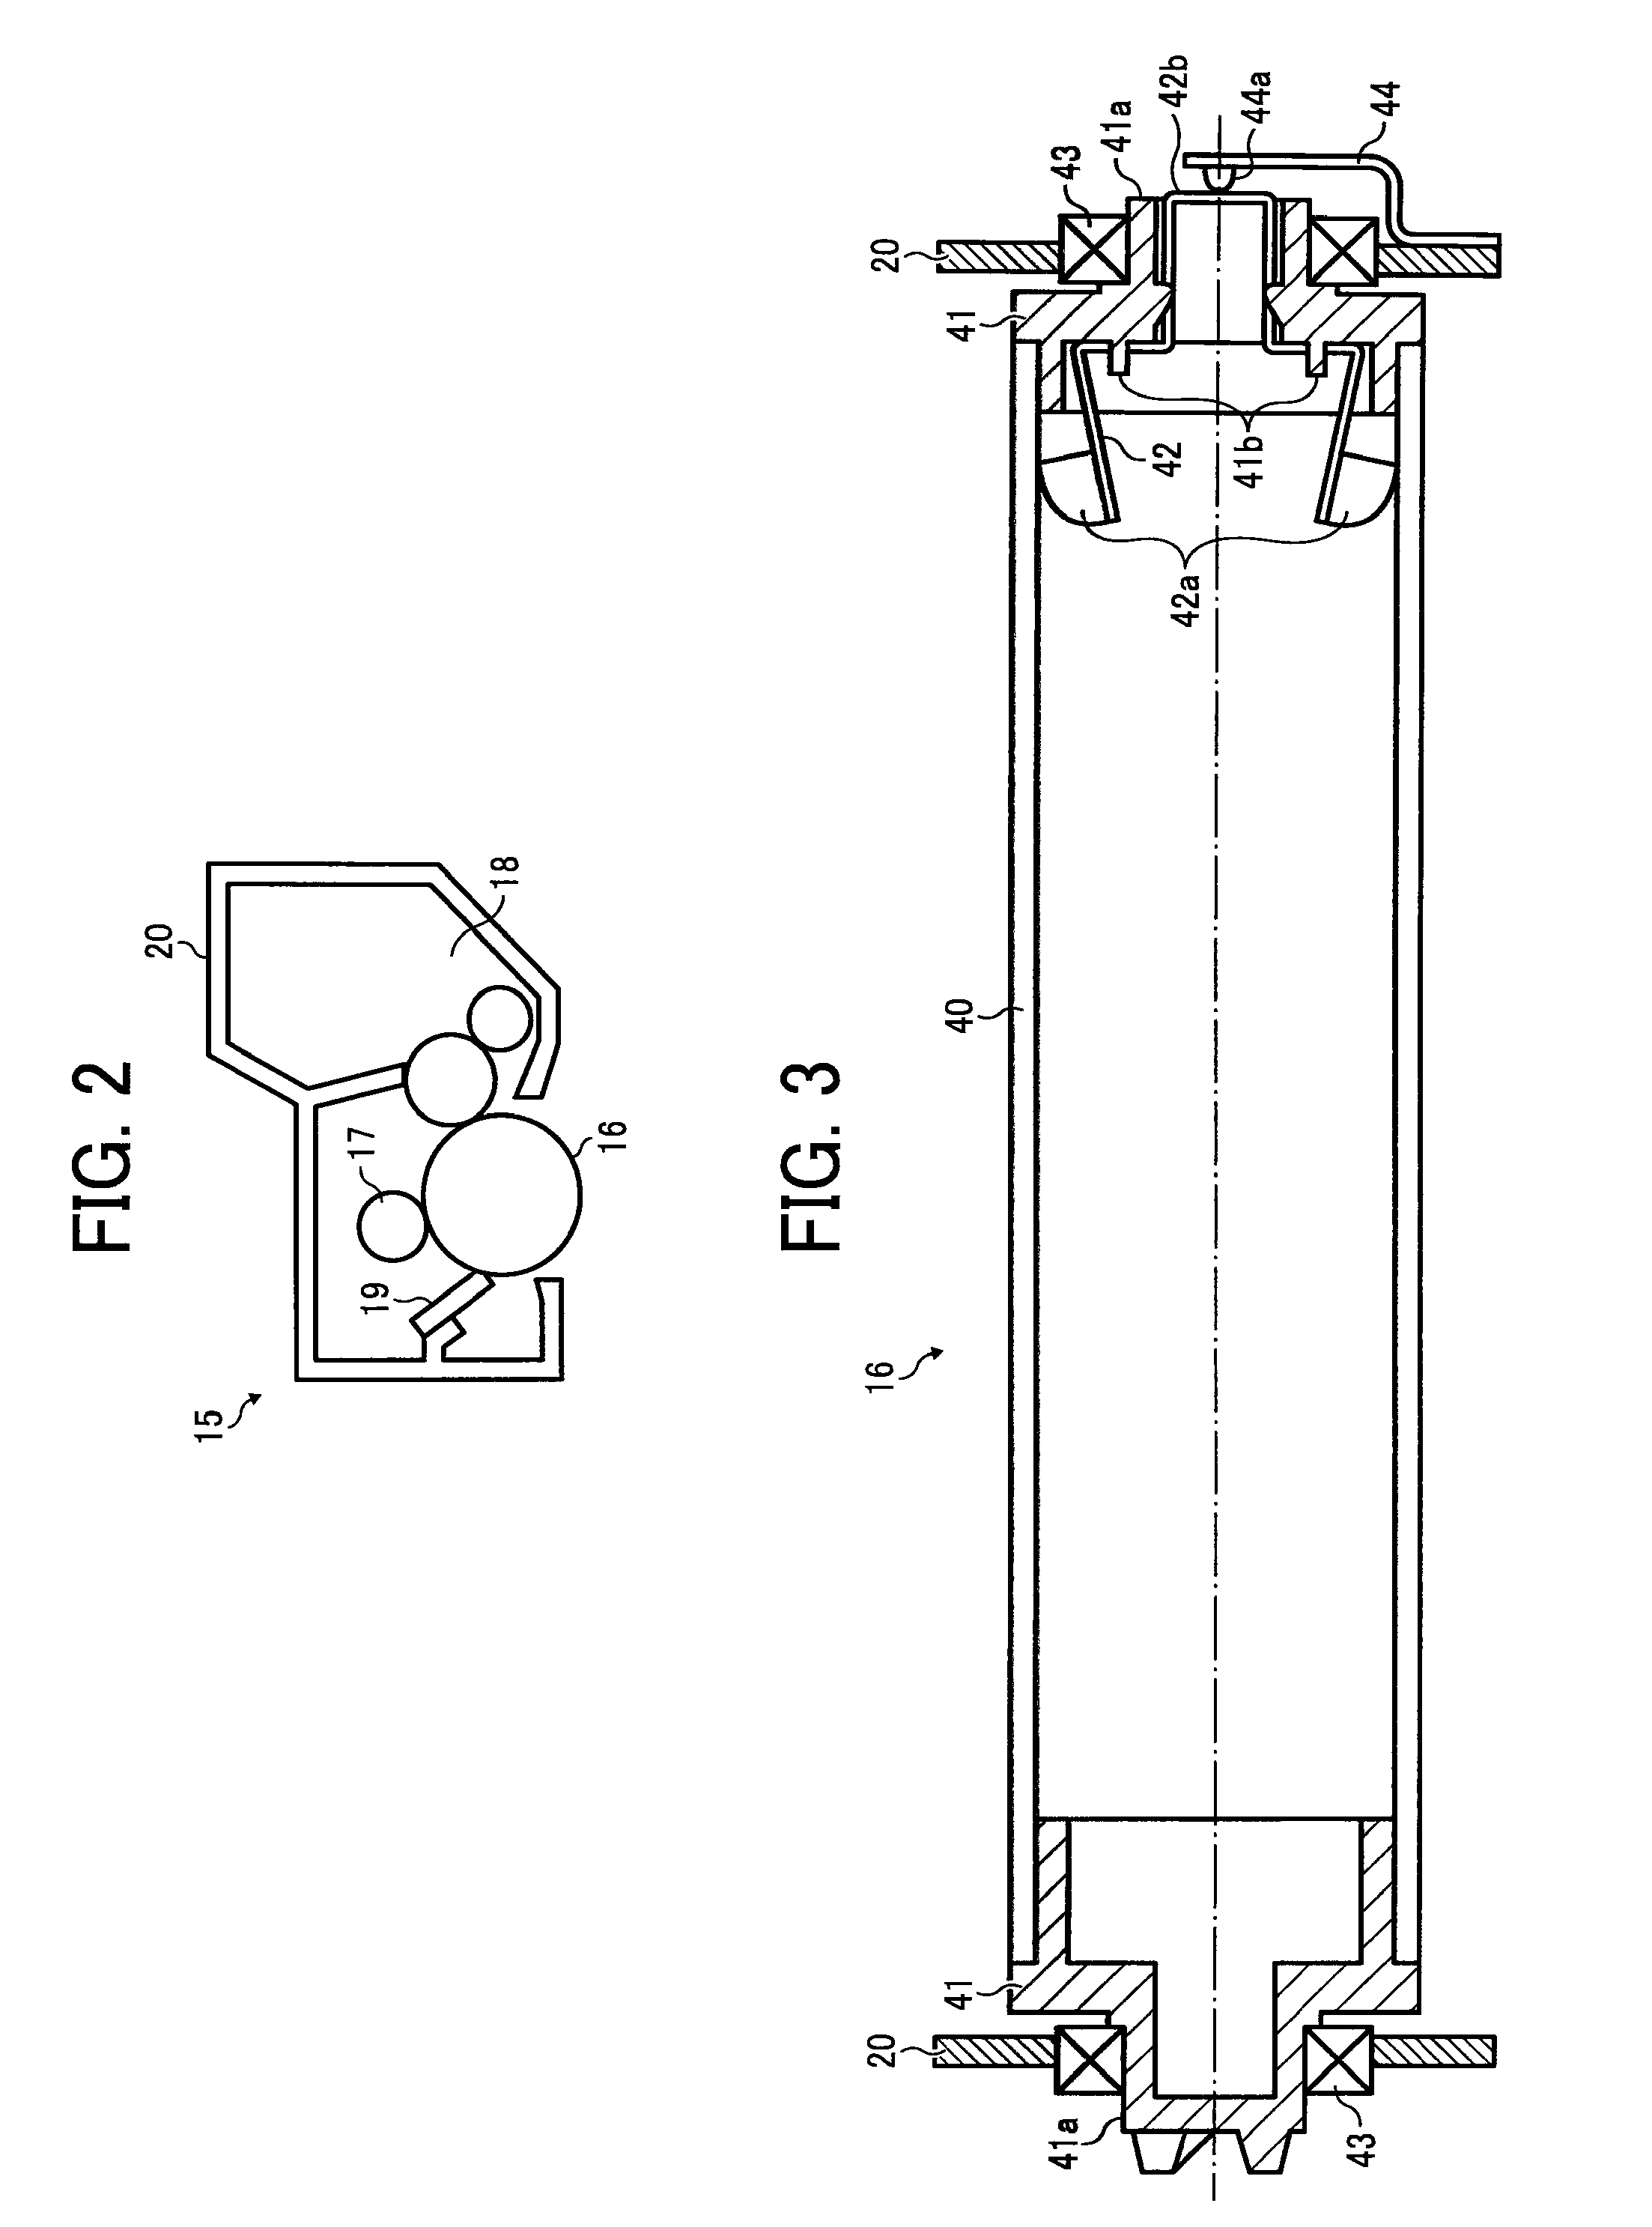 Electrophotographic photoreceptor, photoreceptor supporting device, imaging device and process cartridge